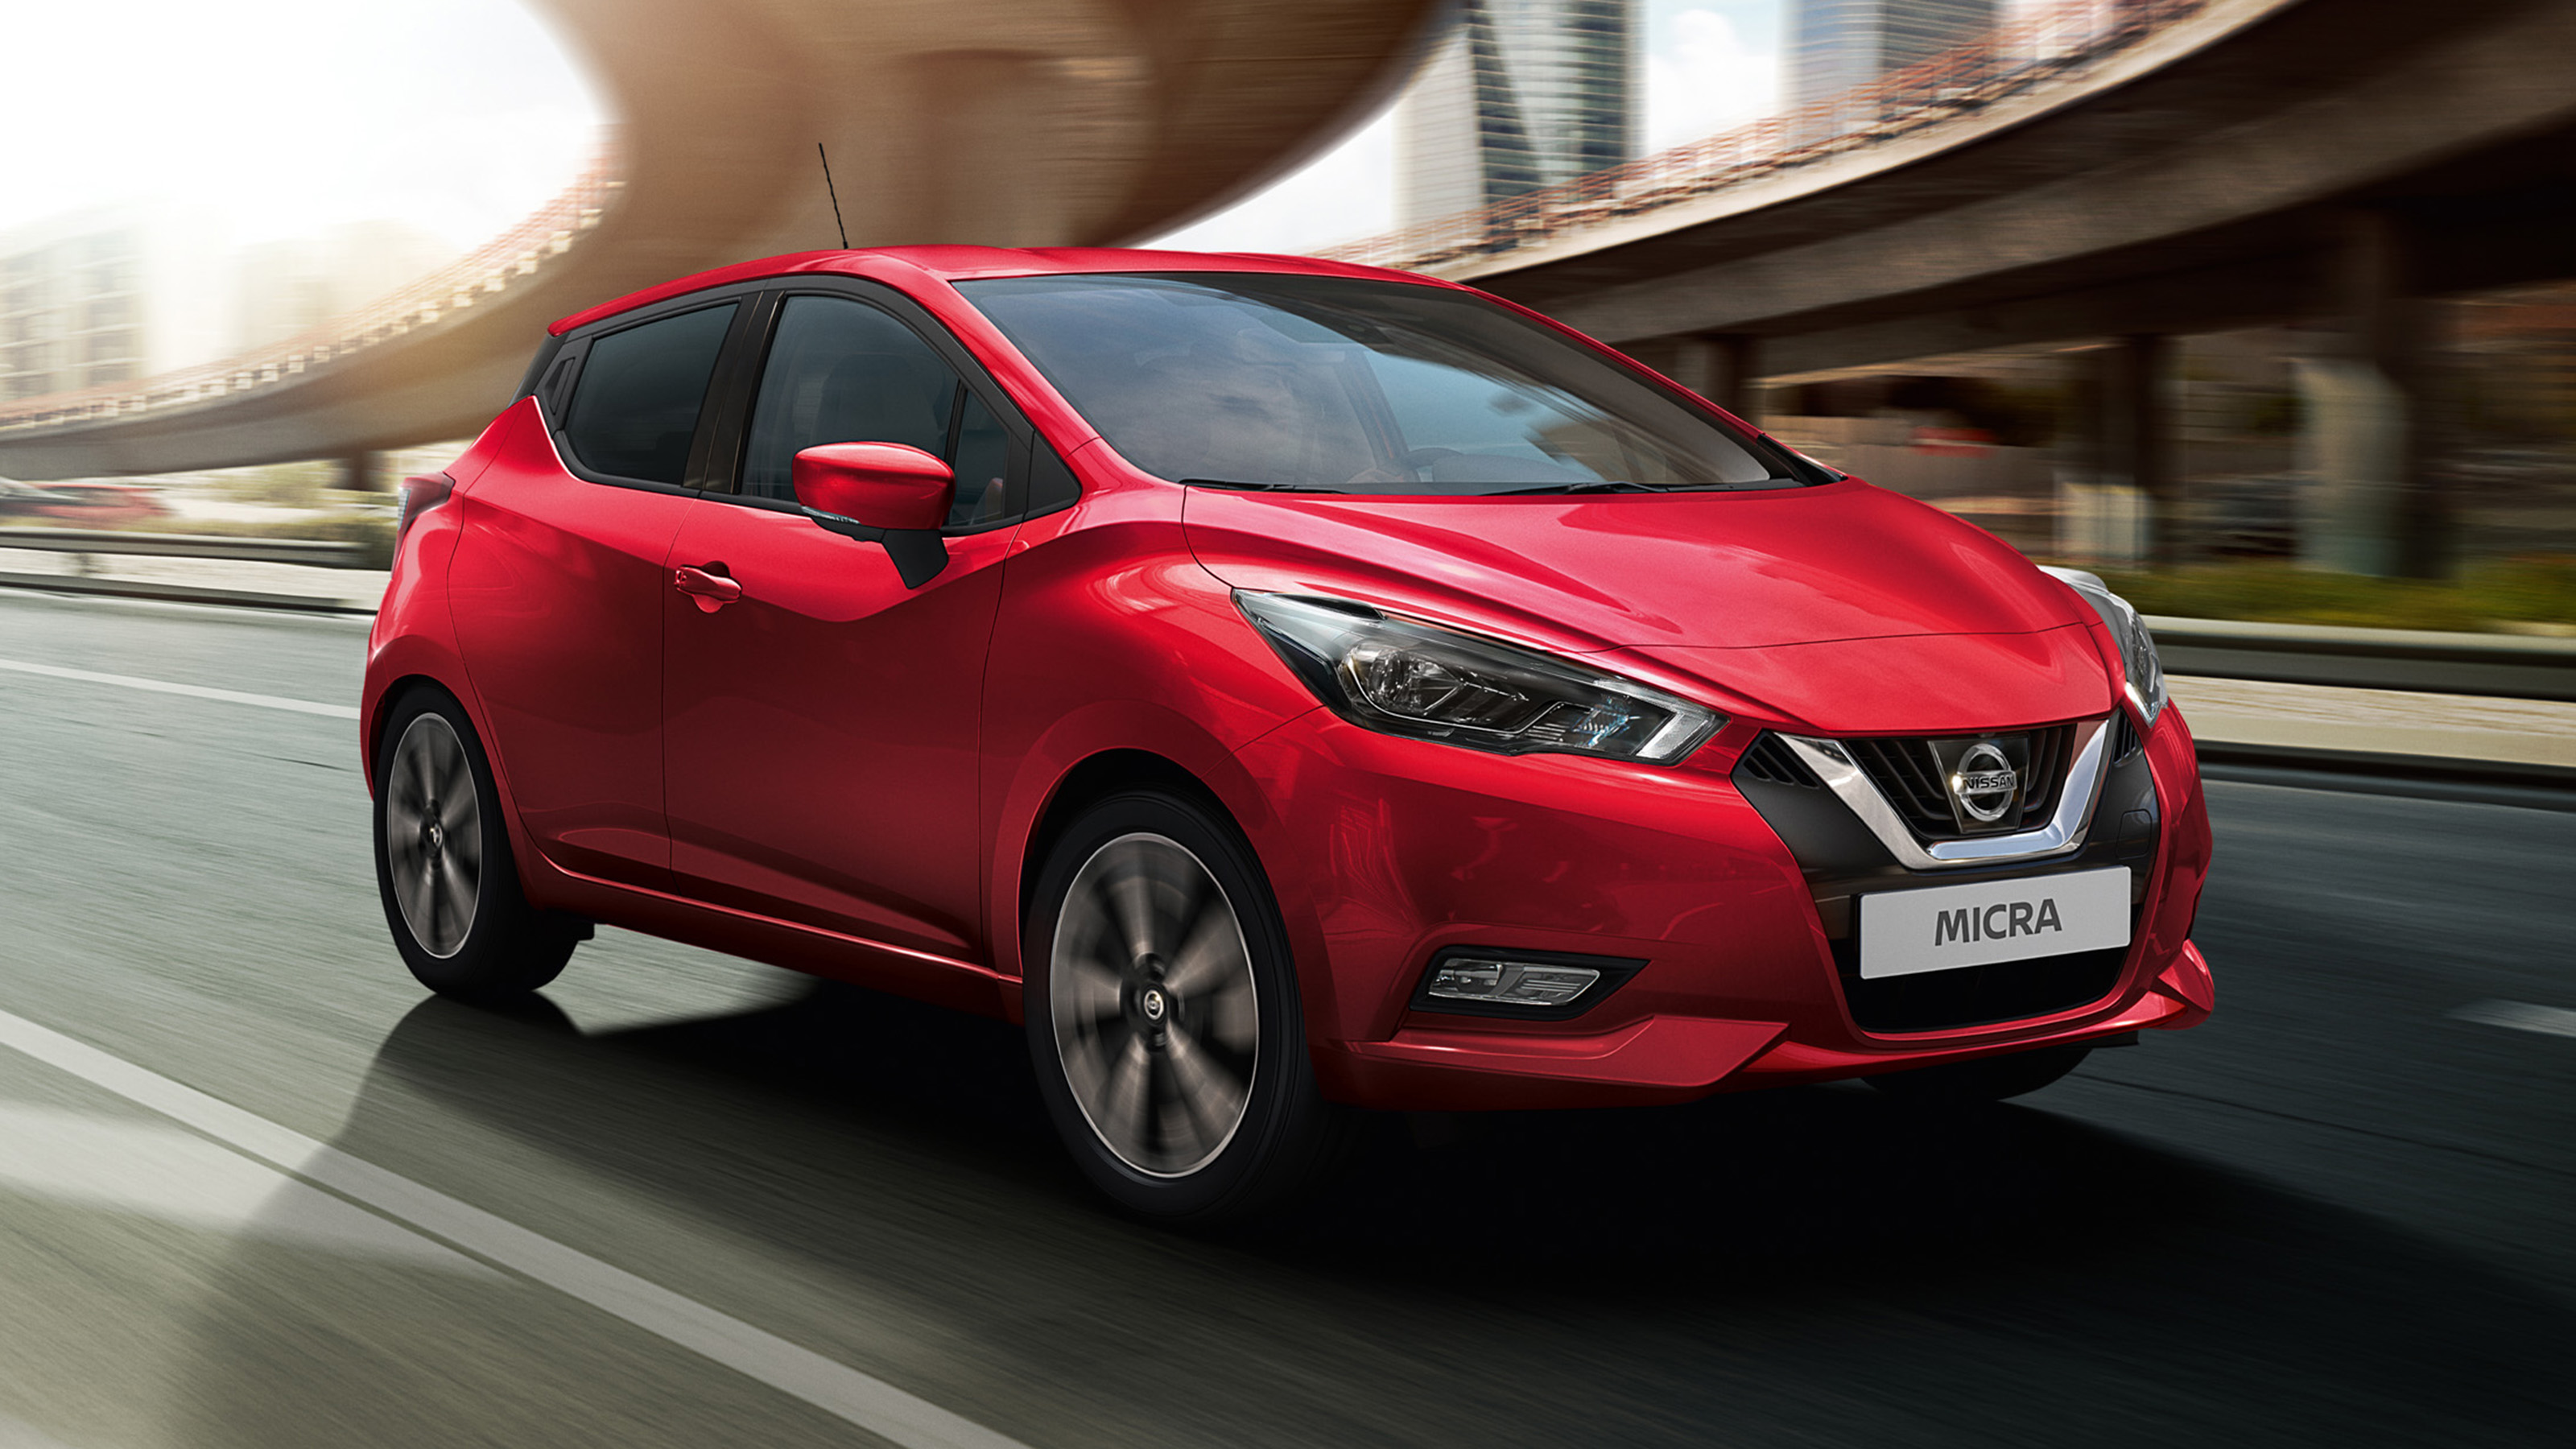 https://mediacloud.carbuyer.co.uk/image/private/s--c5Tq17wB--/v1605623874/carbuyer/2020/11/Nissan%20Micra%20update%202020%20official%20CB-5.jpg